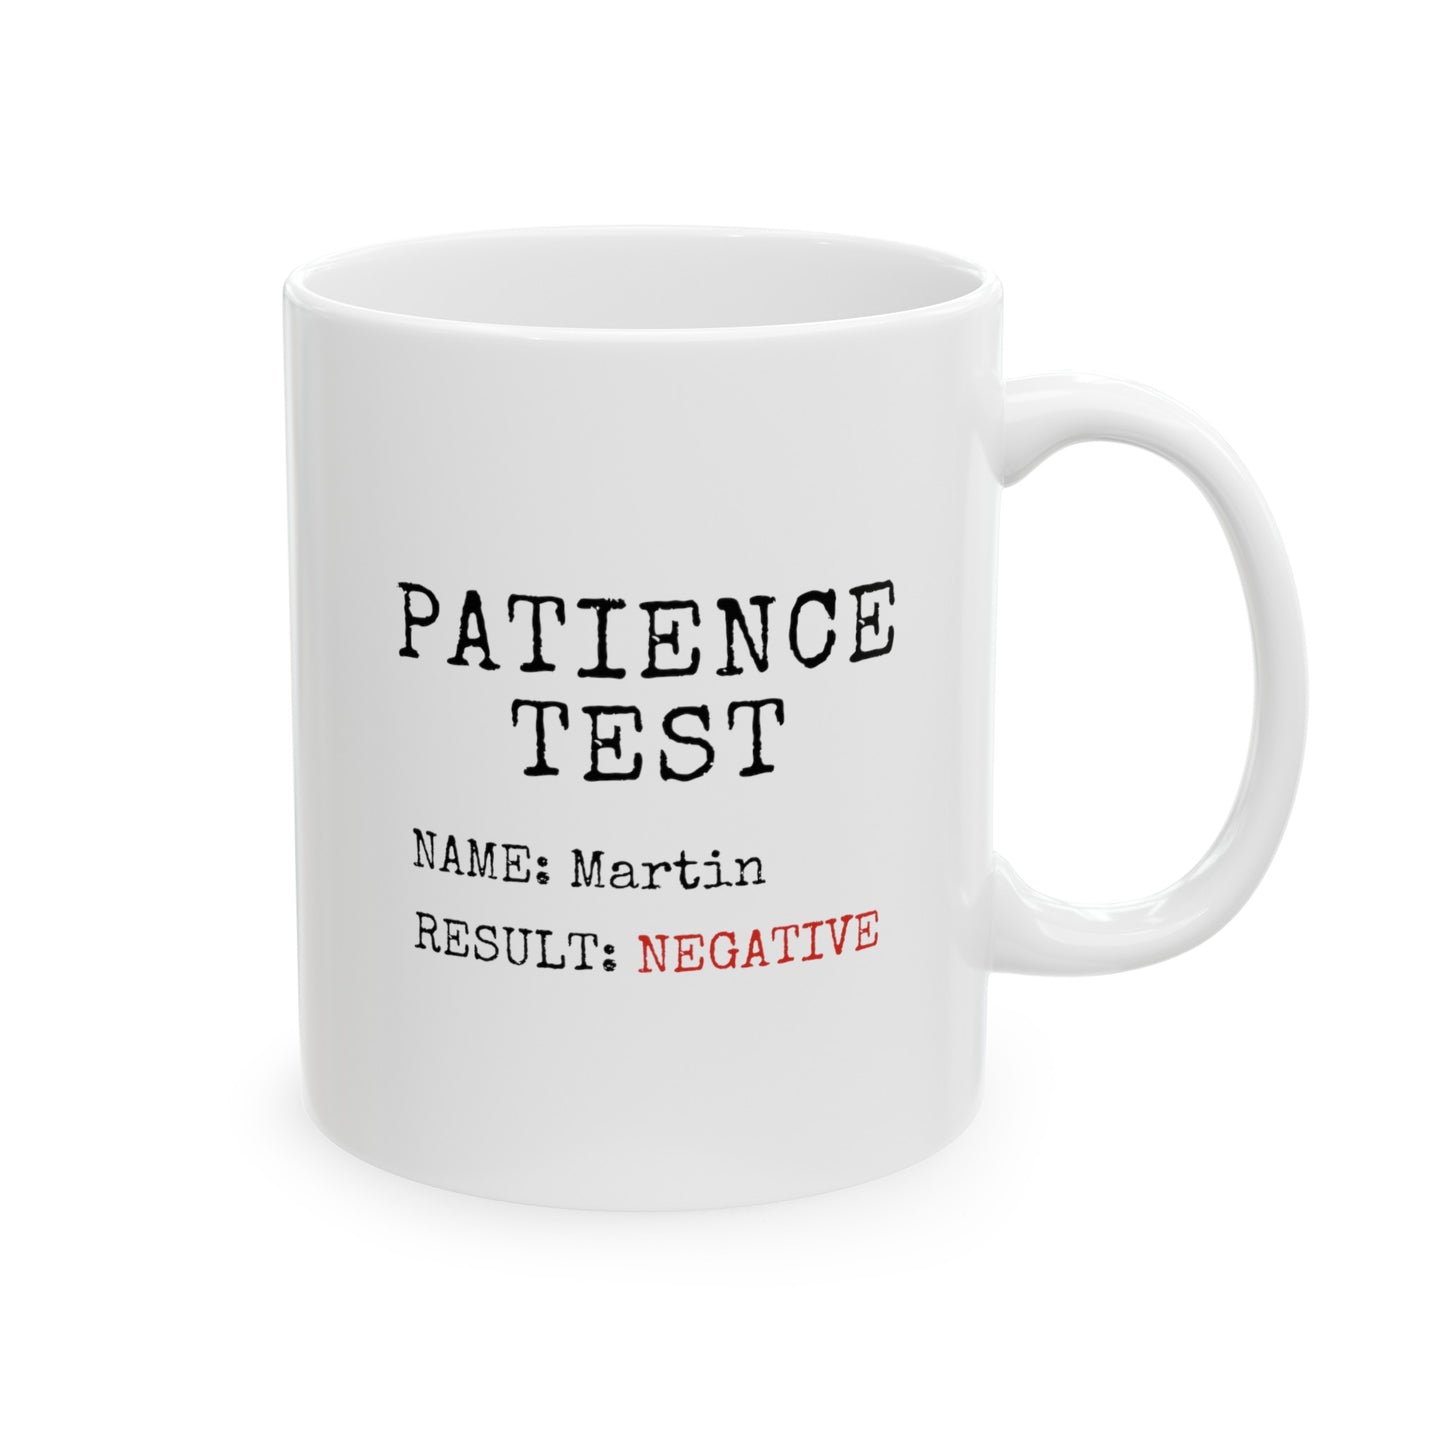 Personalized Patience Test 11oz white funny large coffee mug gift for coworker custom customize name boss manager colleague friend sarcastic sarcasm result waveywares wavey wares wavywares wavy wares